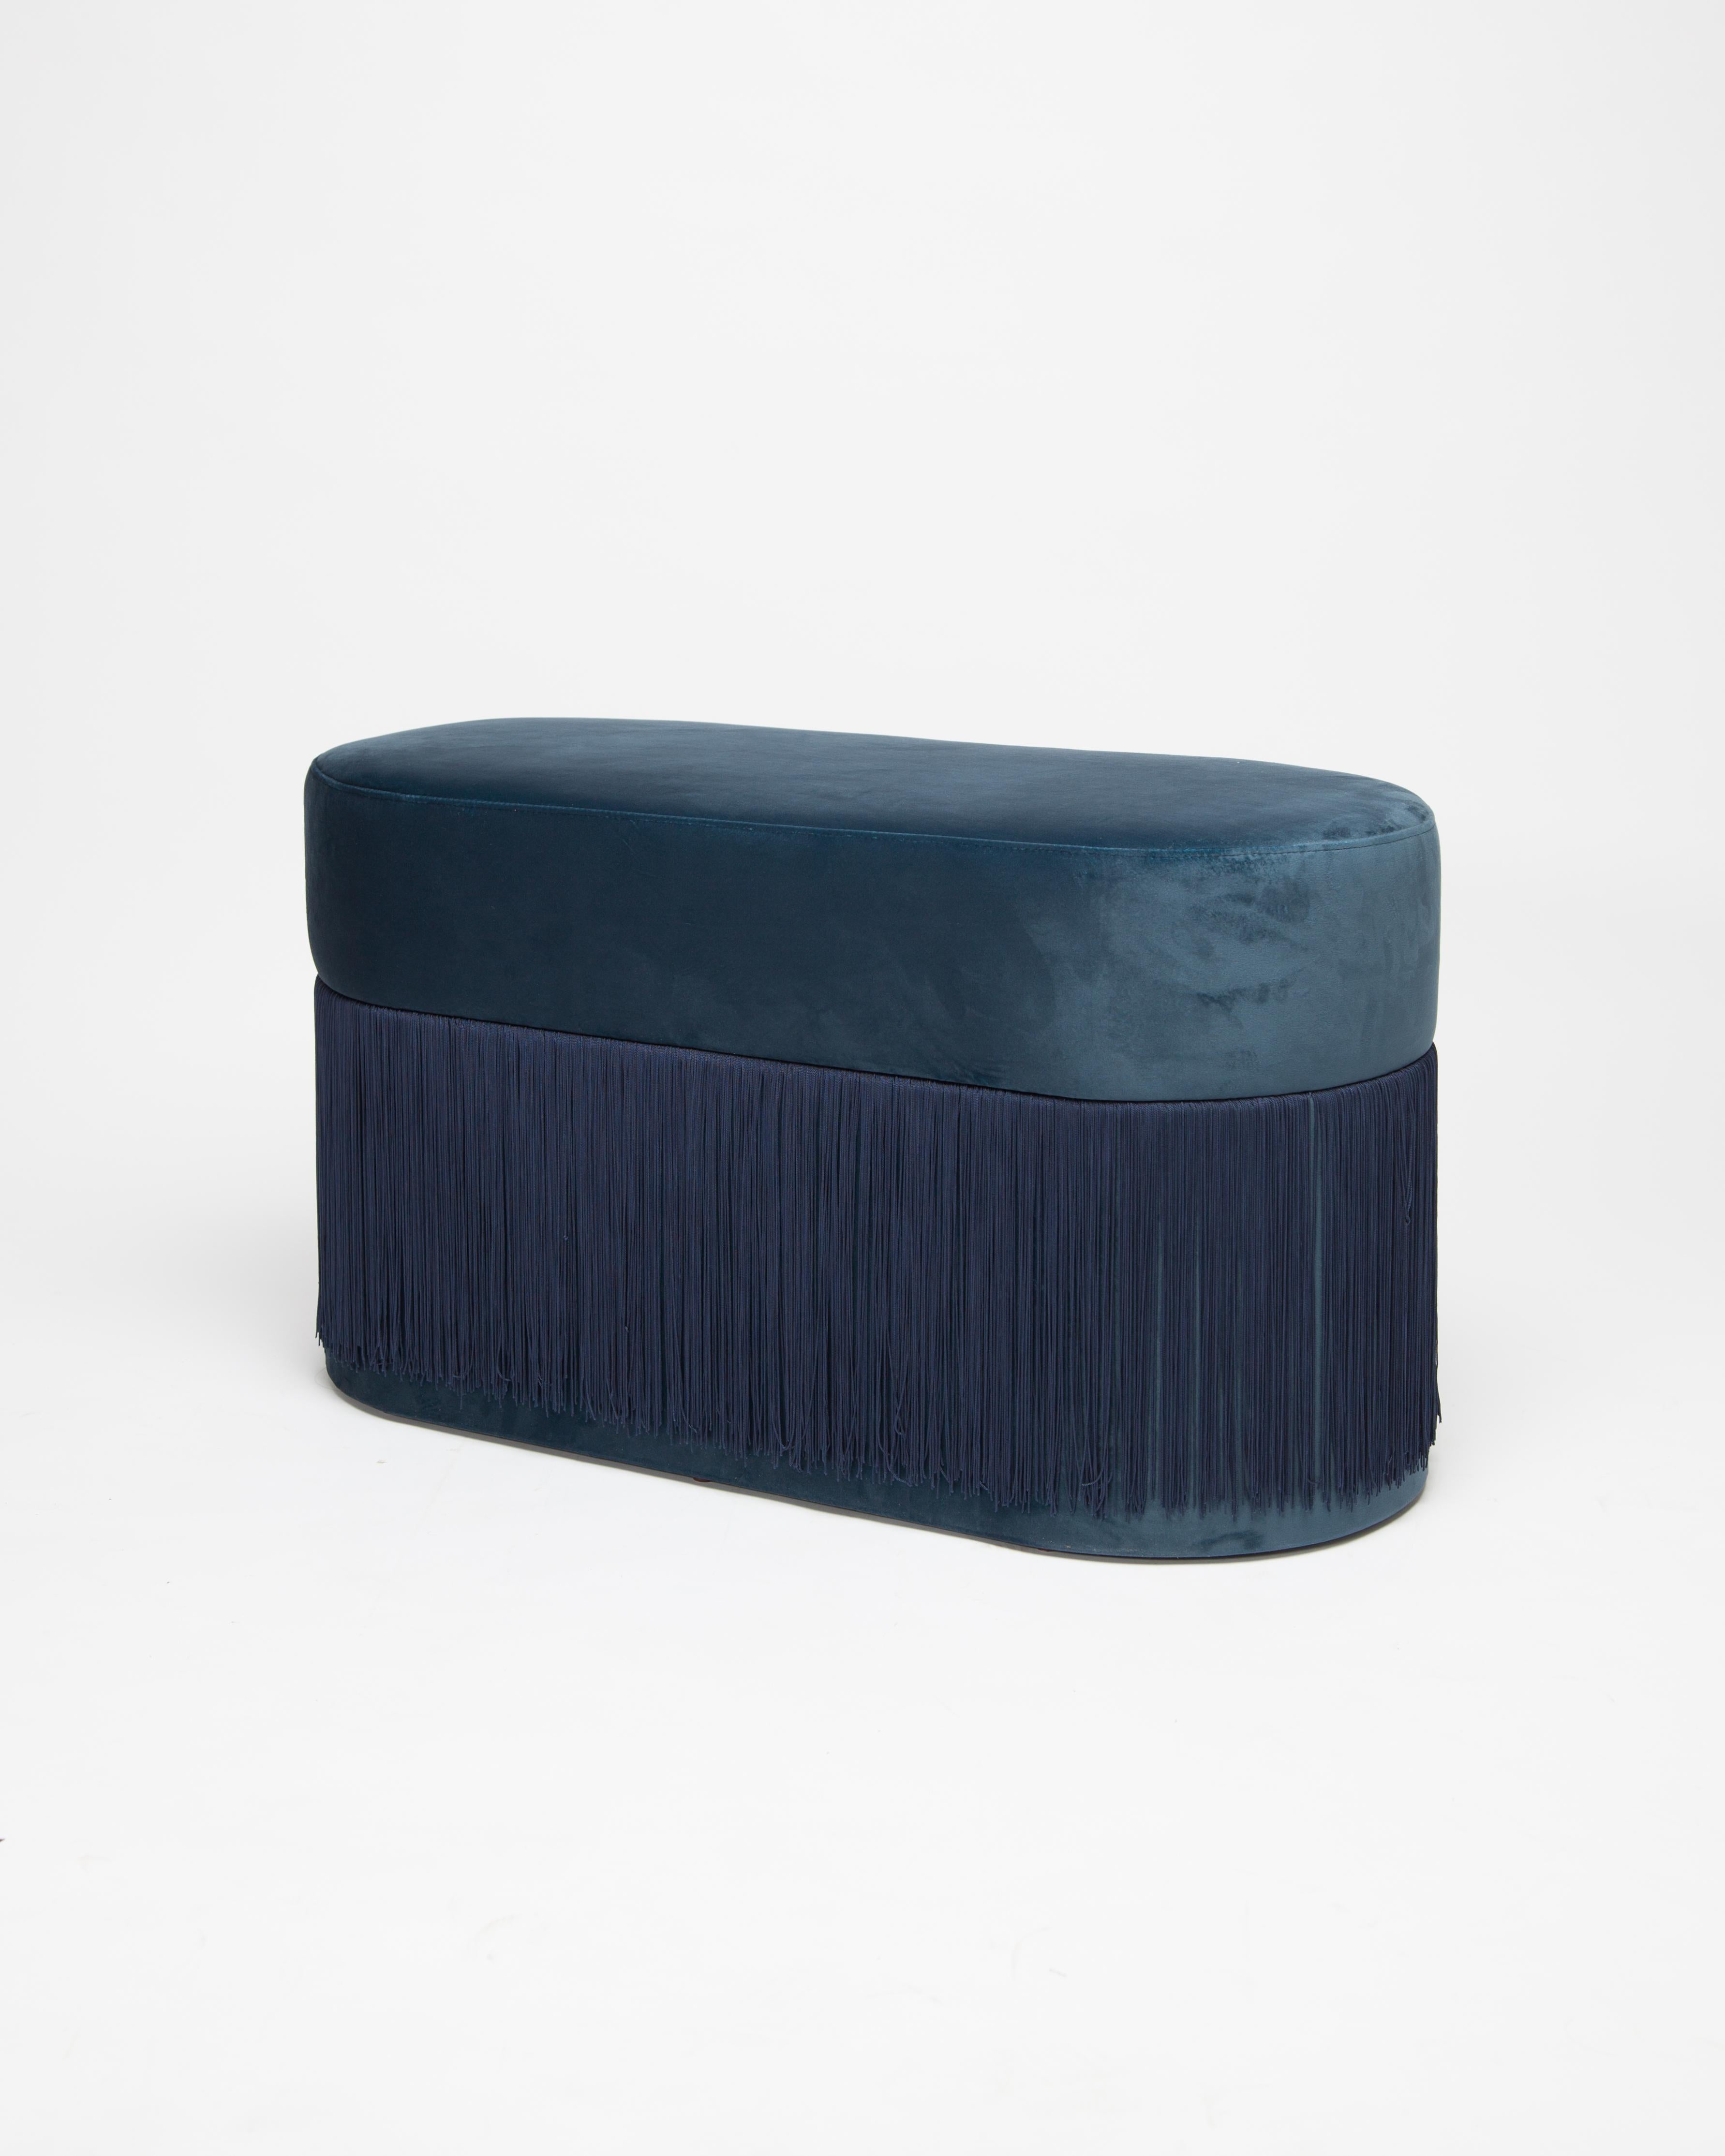 Pouf Pill L by Houtique
Dimensions: H 45 x 80 x 35 cm
Materials: Velvet upholstery and 30cm fringes

Pill Pouf L
Art-deco style pouf with wood structure and velvet fabric.
2 fiber-board discs of 16mm, joined by wooden tufts.
Upholstery Velvet 100%